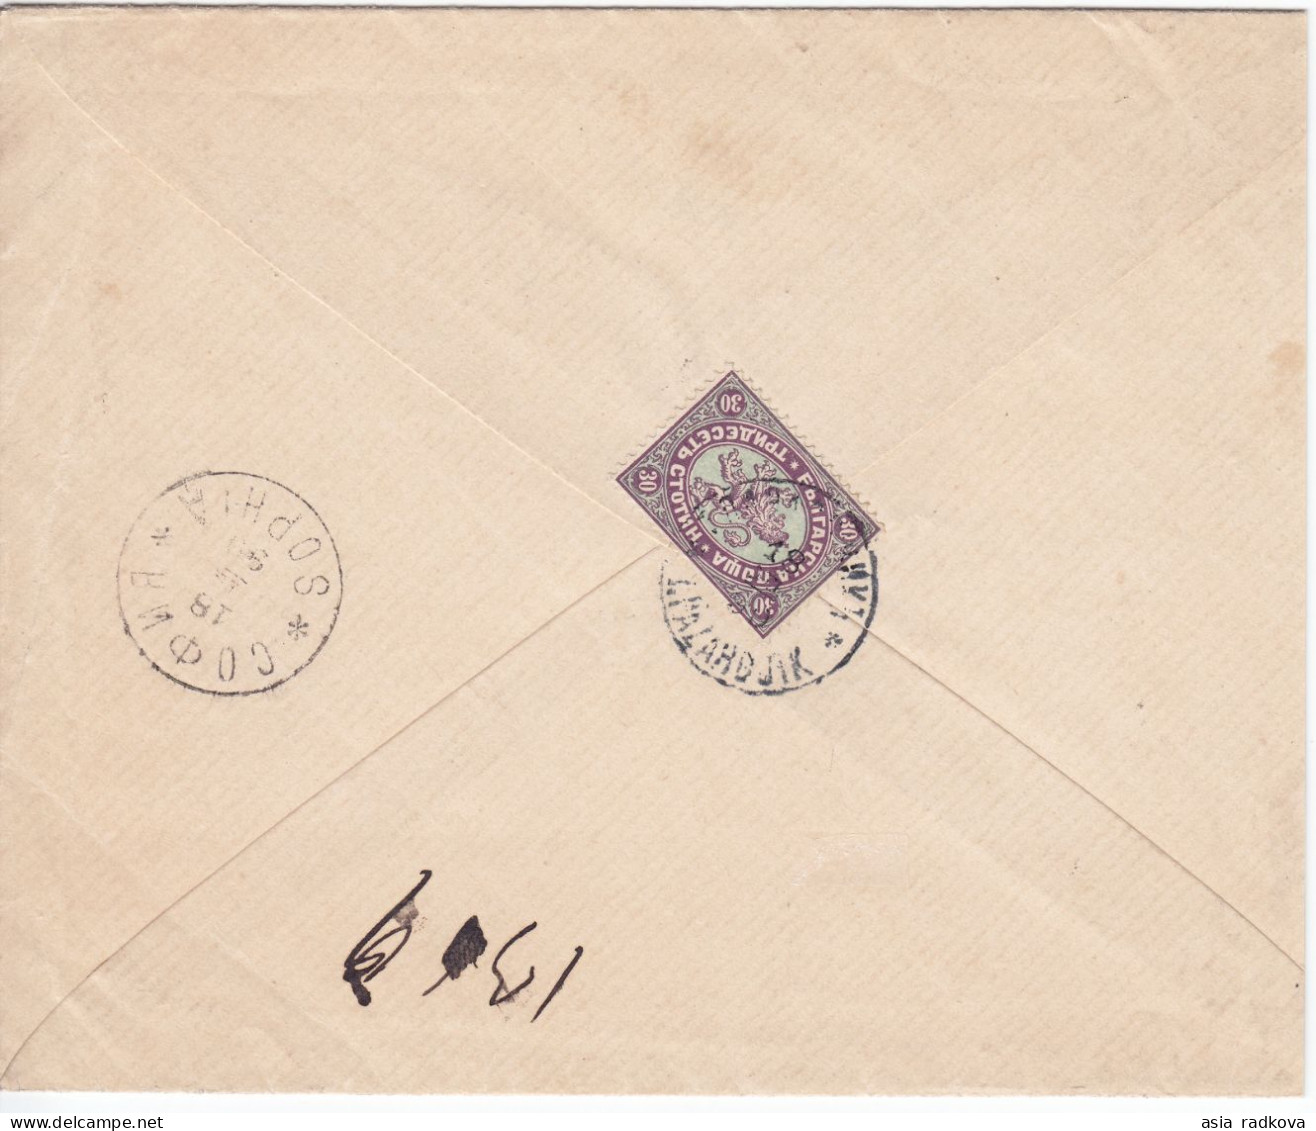 1890 BULGARIA INLAND REGISTERED LETTER 30 ST. LARGE LION STAMP - SINGLE FRANKING RR. - Lettres & Documents